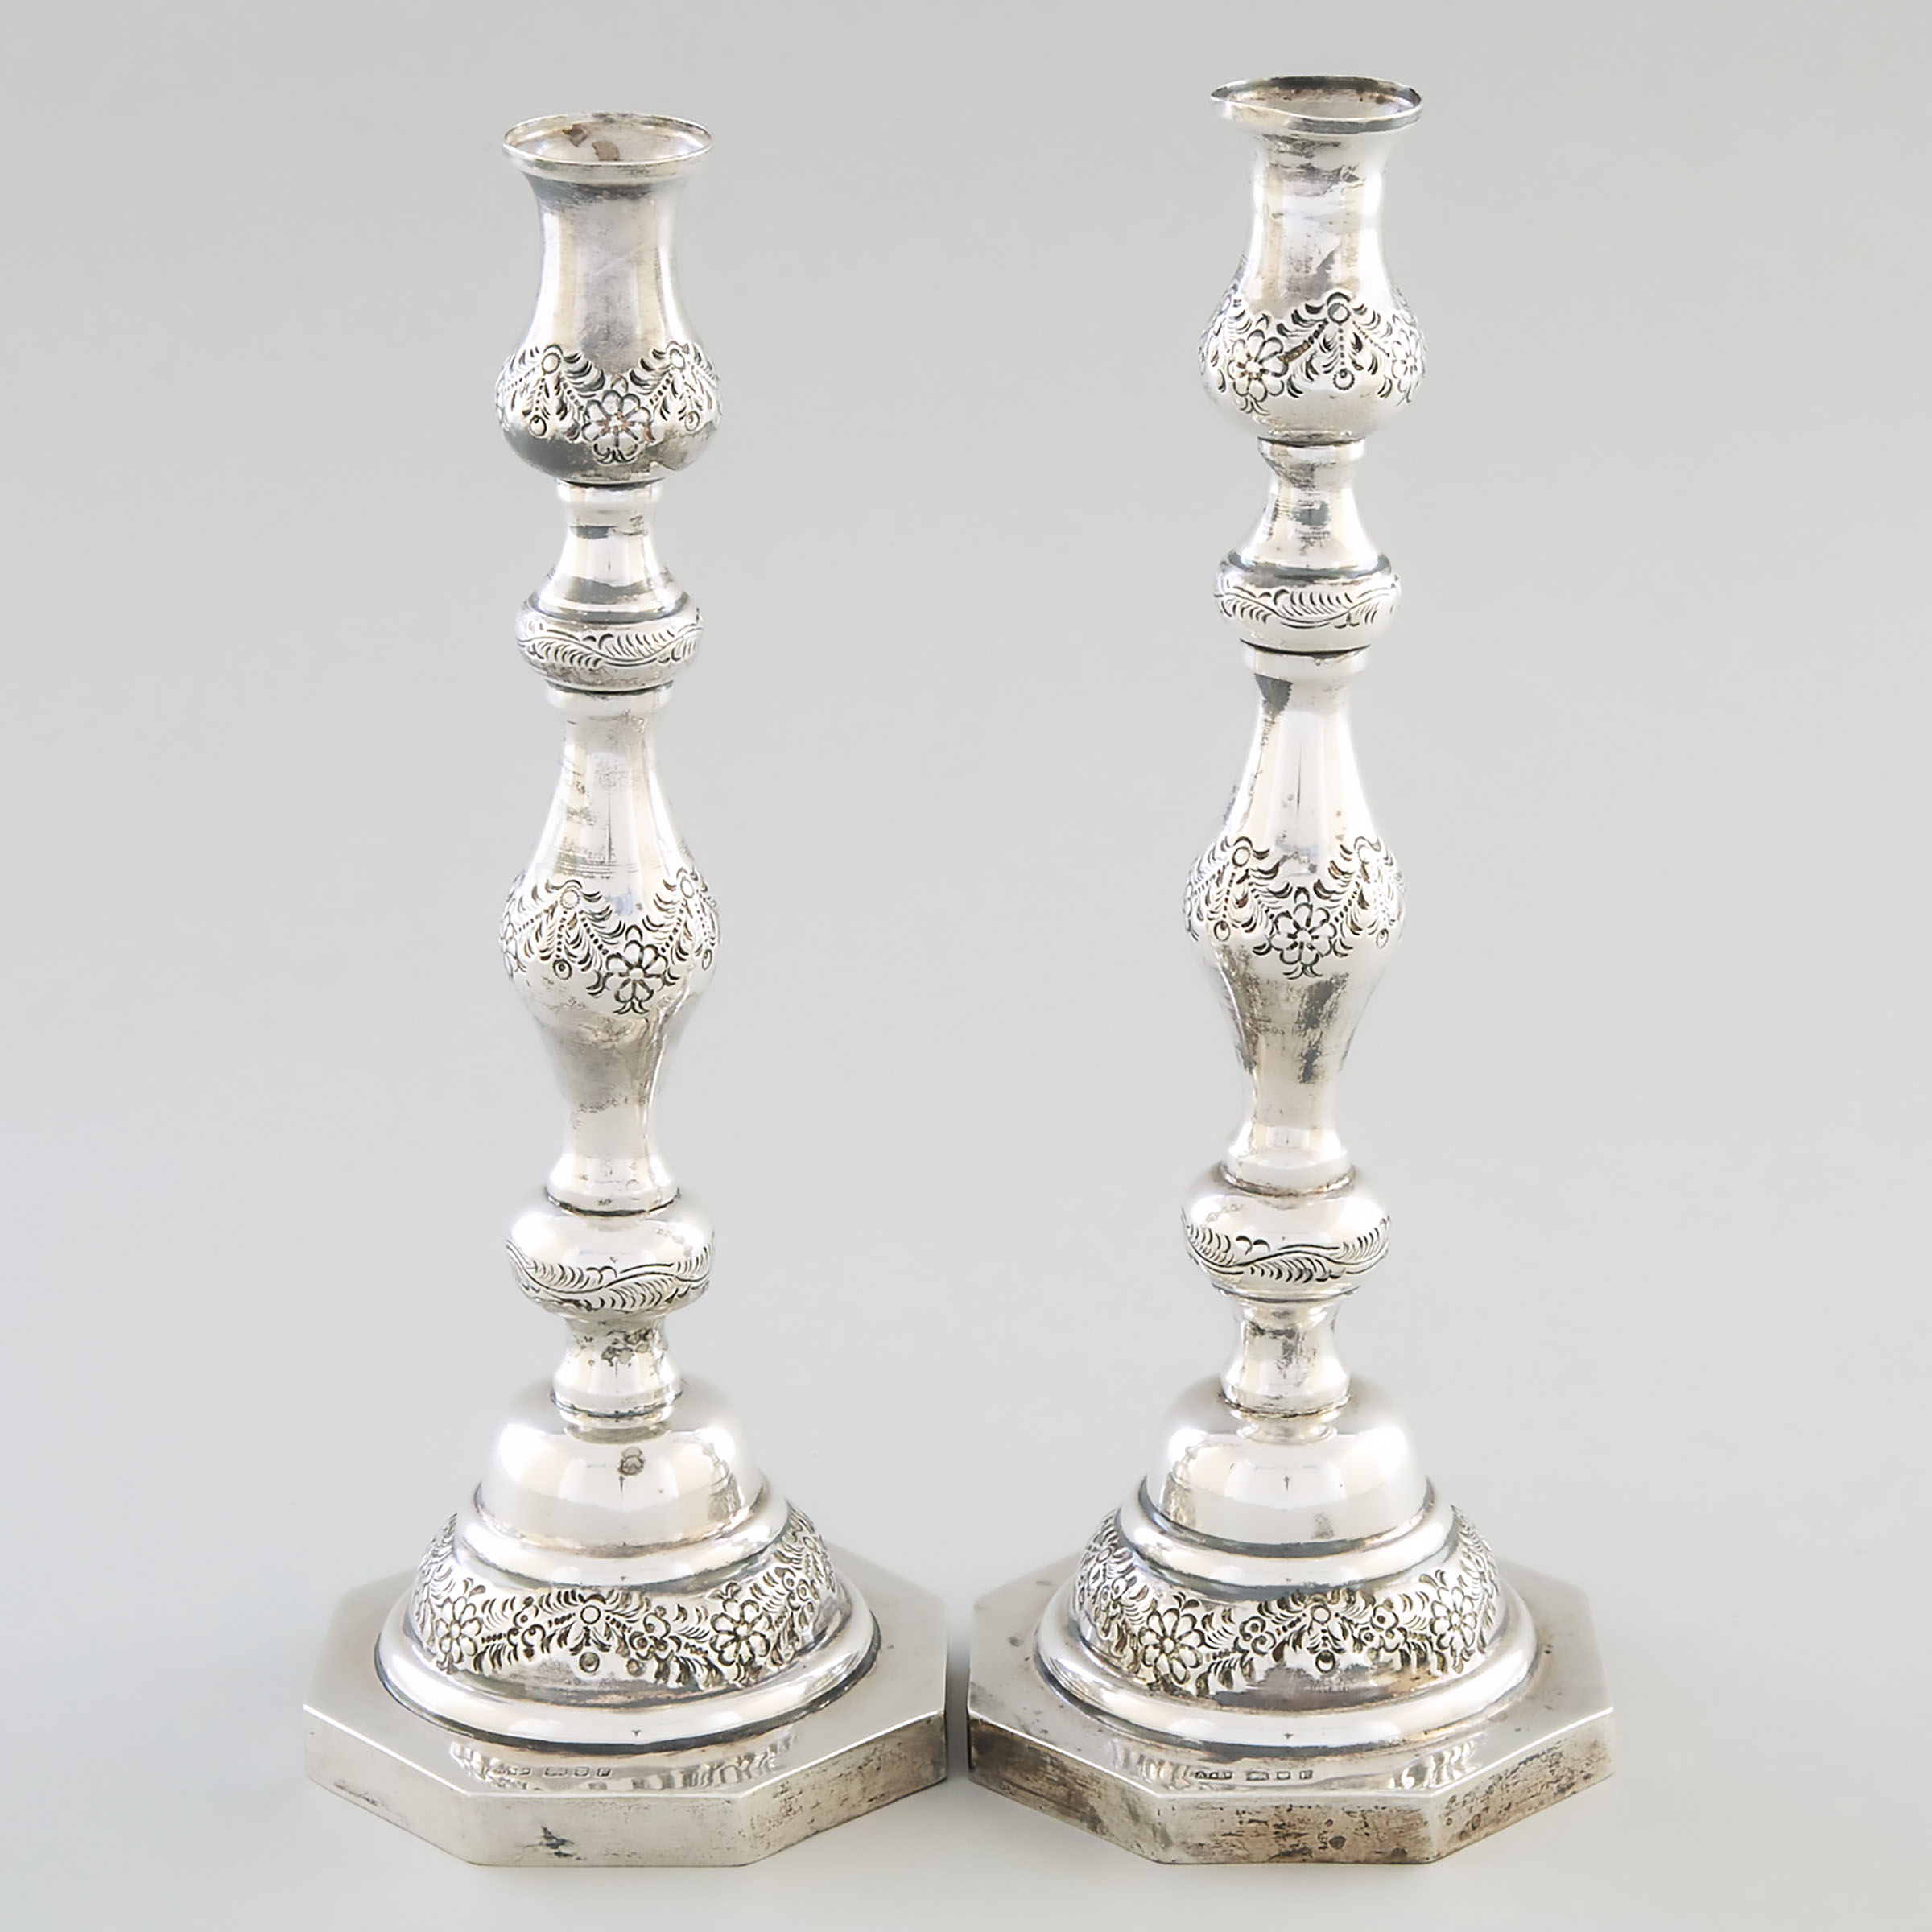 Pair of English Silver Table Candlesticks, A. Taite & Sons, London, 1941